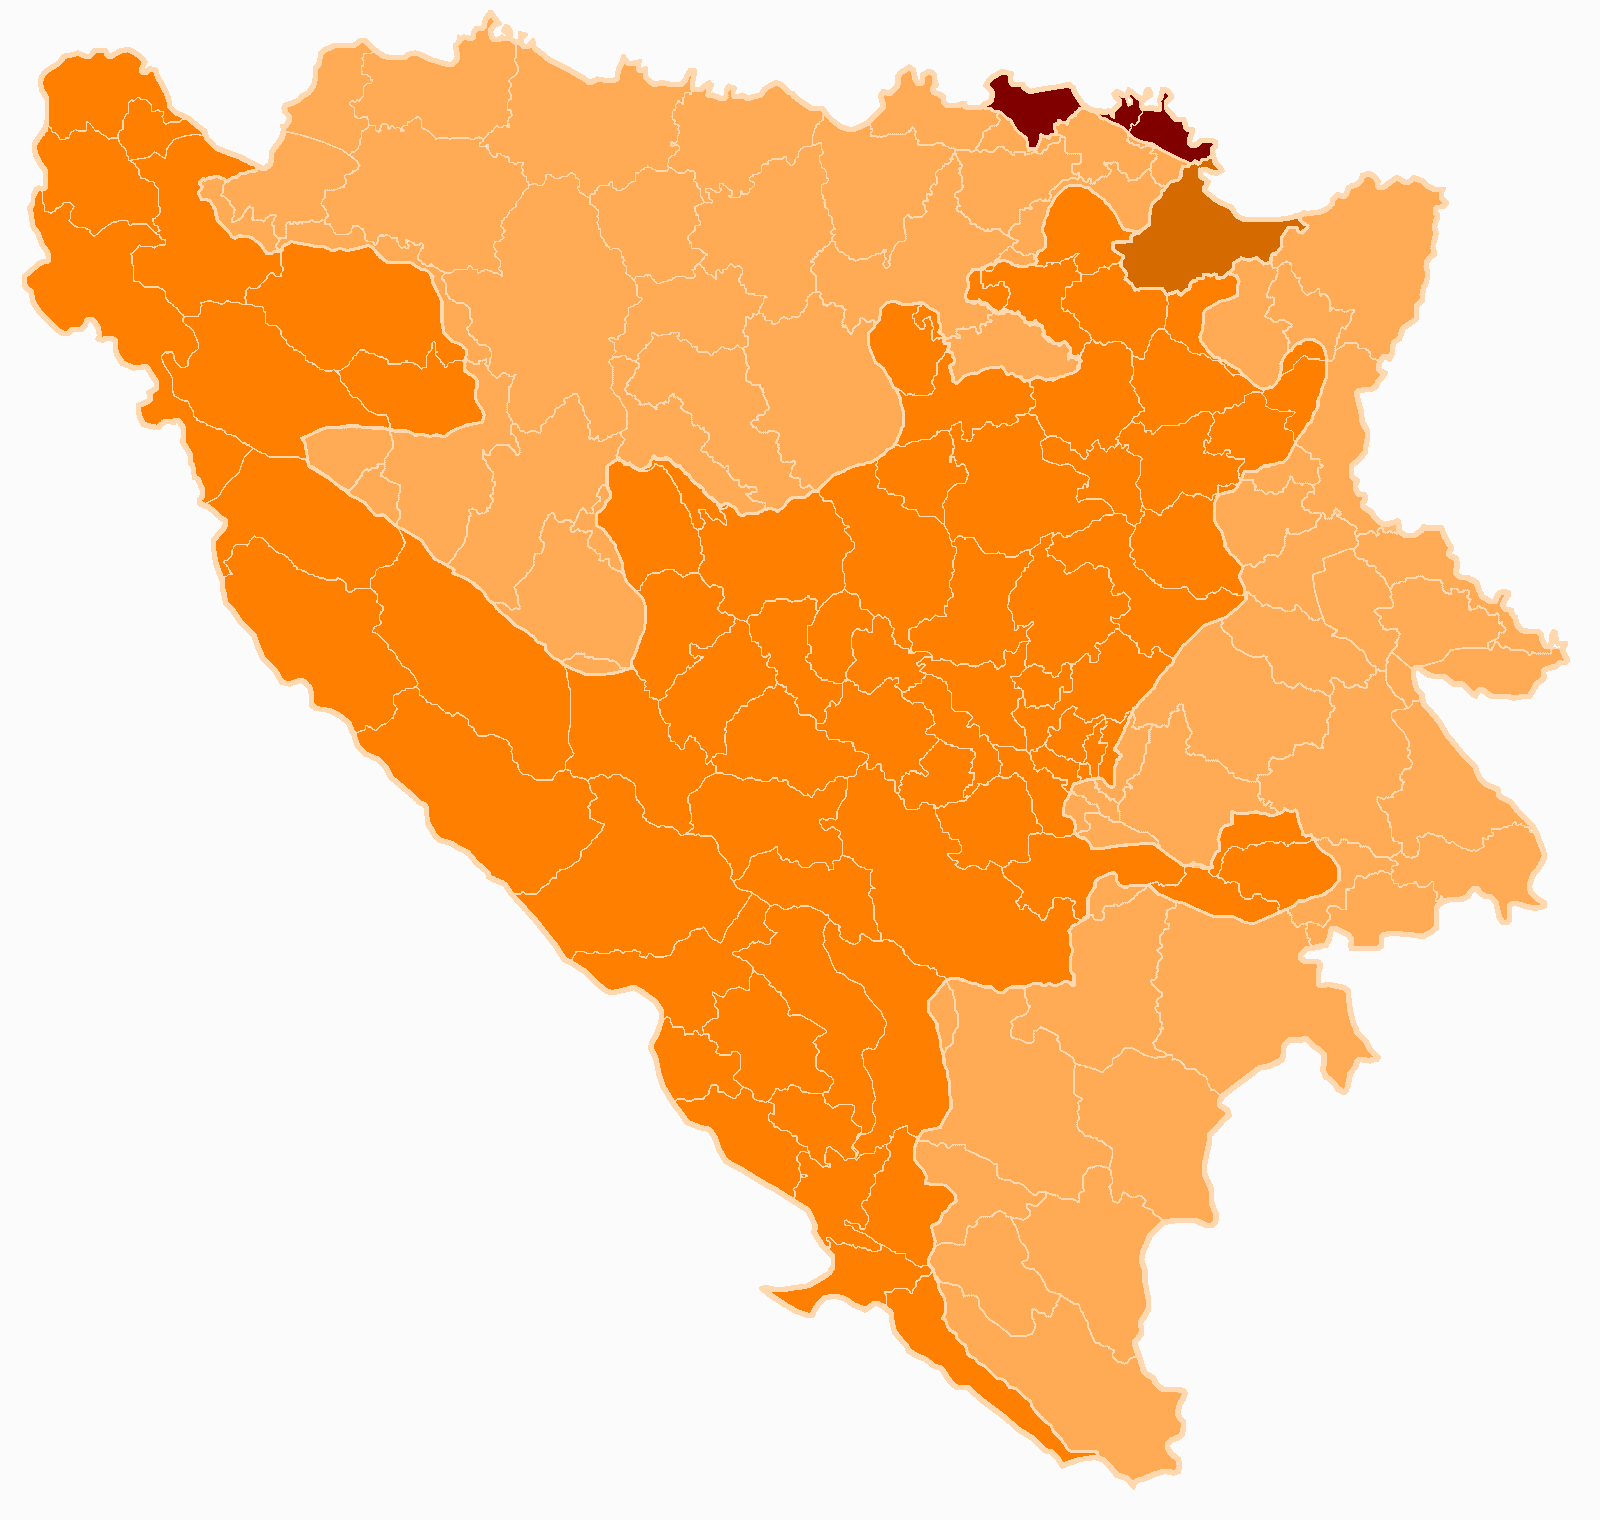 File:bosnia And Herzegovina Subdivision Map Posavina Canton.png - Bosnia And Herzegovina, Transparent background PNG HD thumbnail